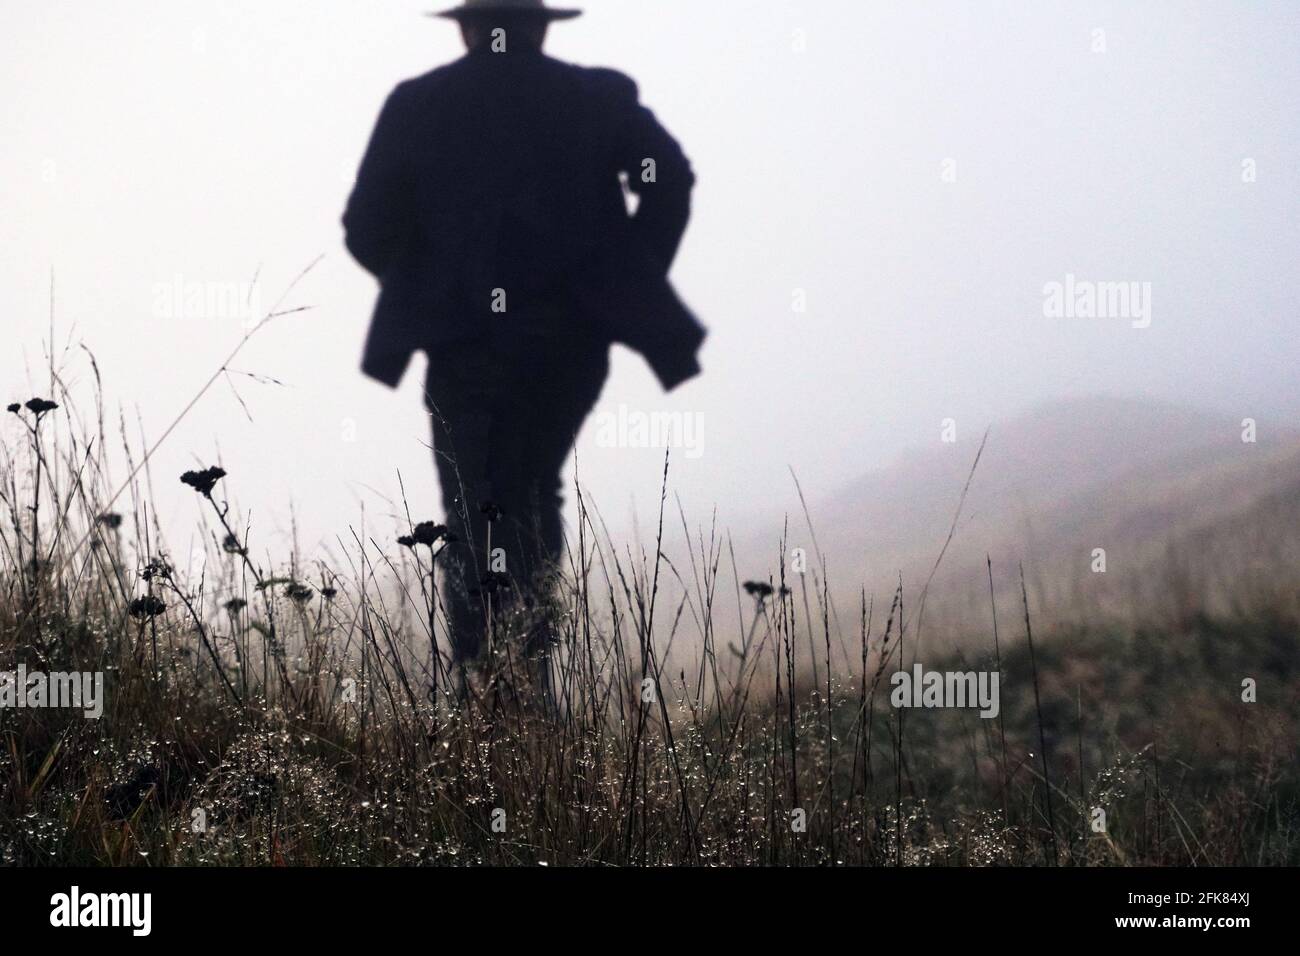 A cinematic concept of a man wearing a classic fedora hat and long coat, running through the countryside on a moody misty day Stock Photo